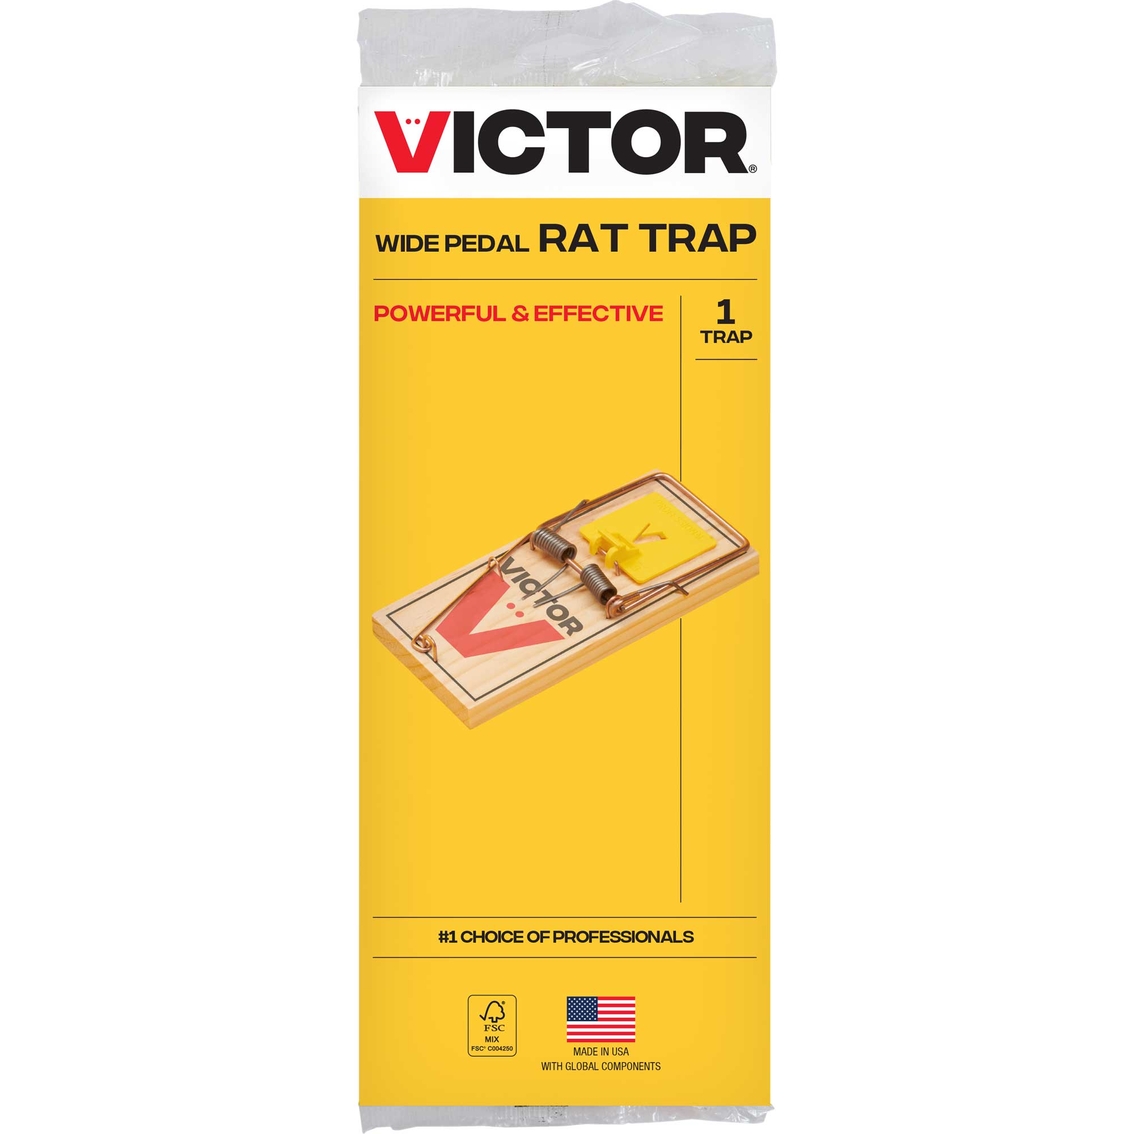 Victor Wooden Mouse Trap